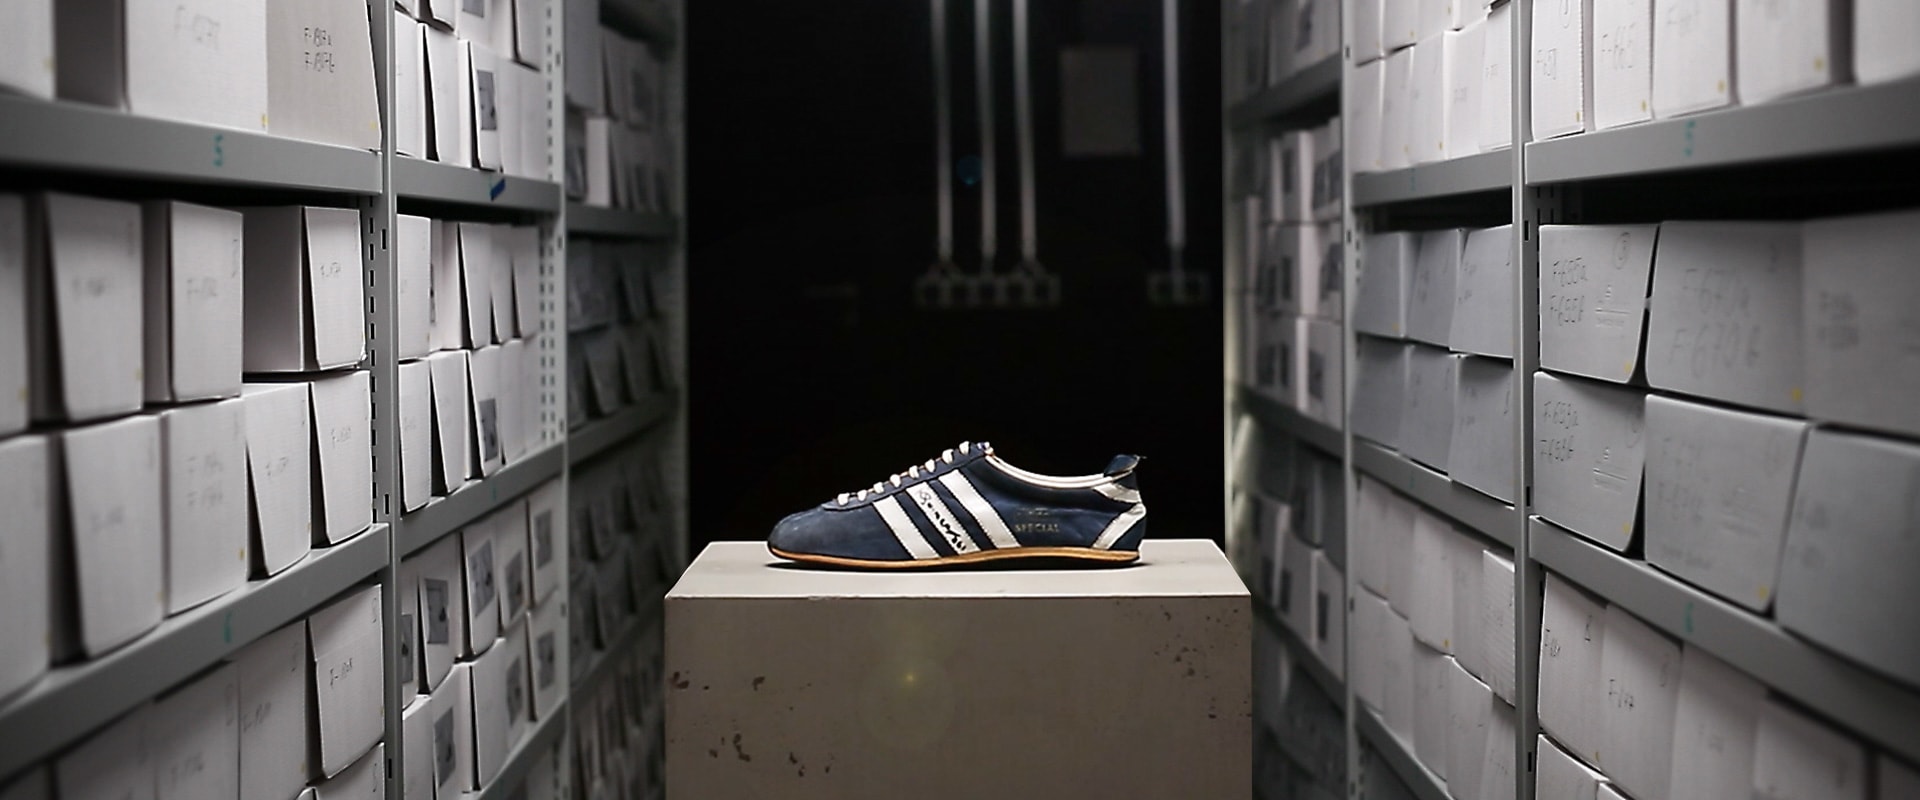 adidas History: 1949 to Now